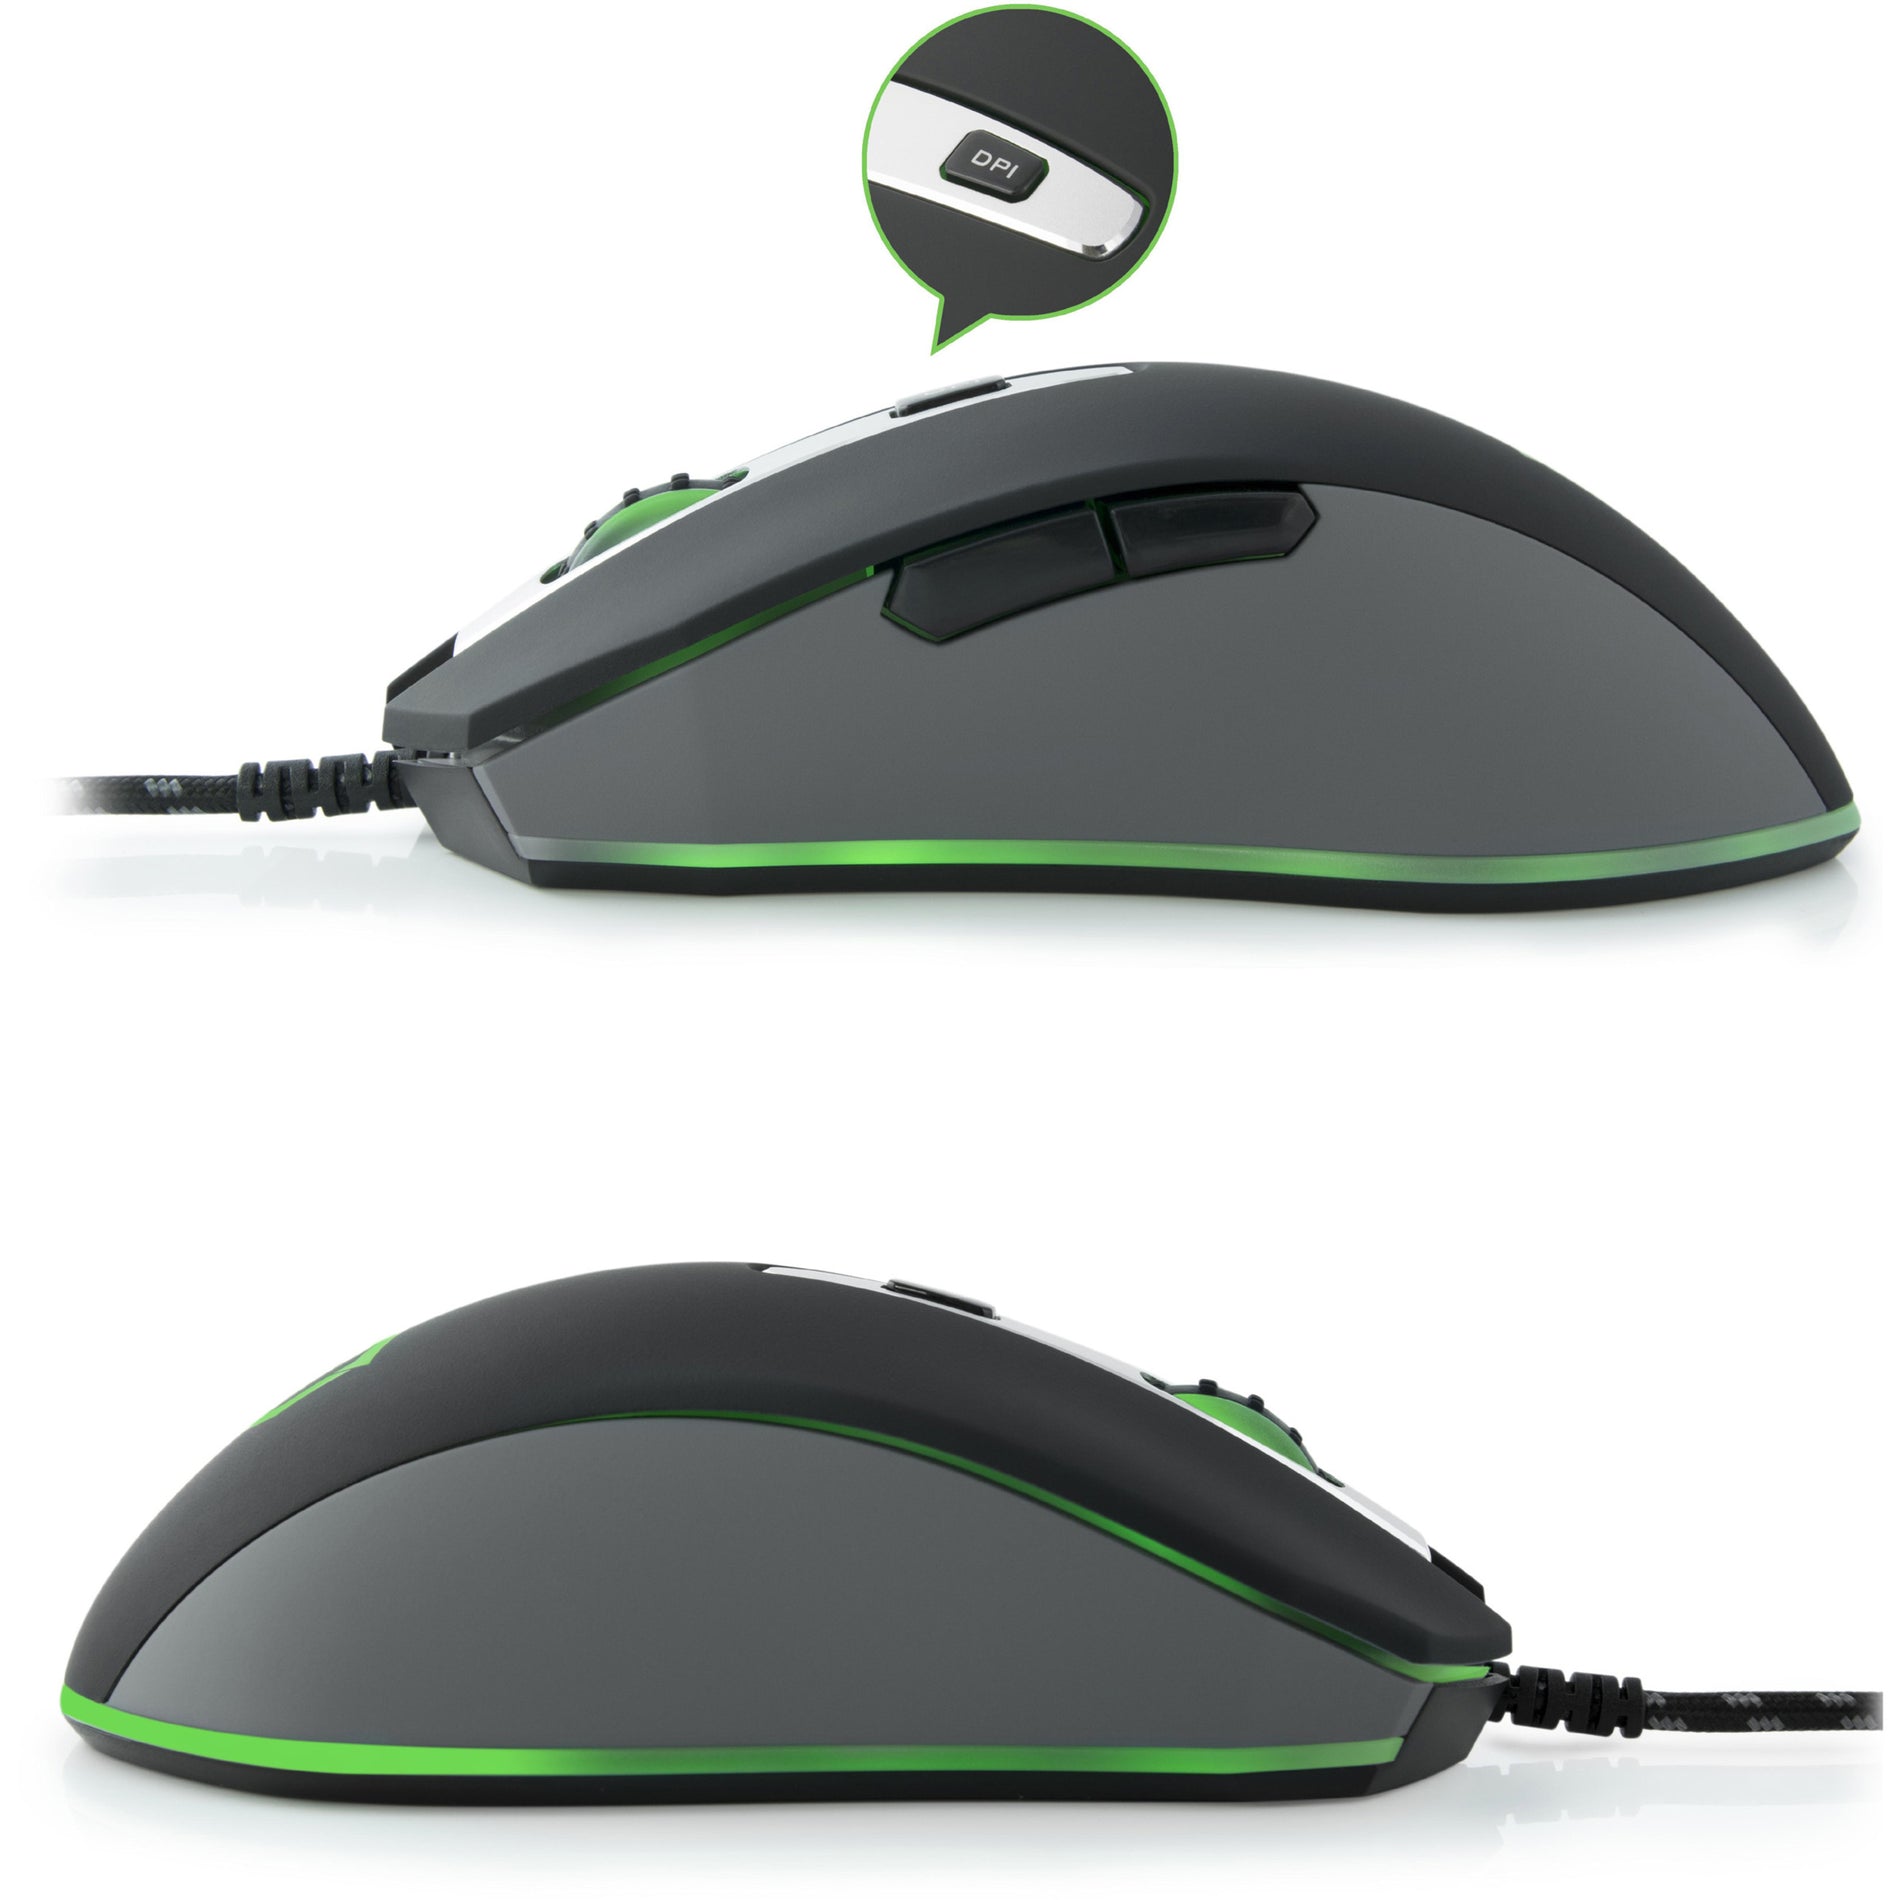 Plugable USB-PM3360 Performance Gaming Mouse, Ergonomic Fit, 3200 DPI, 6 Buttons, Plug-and-Play